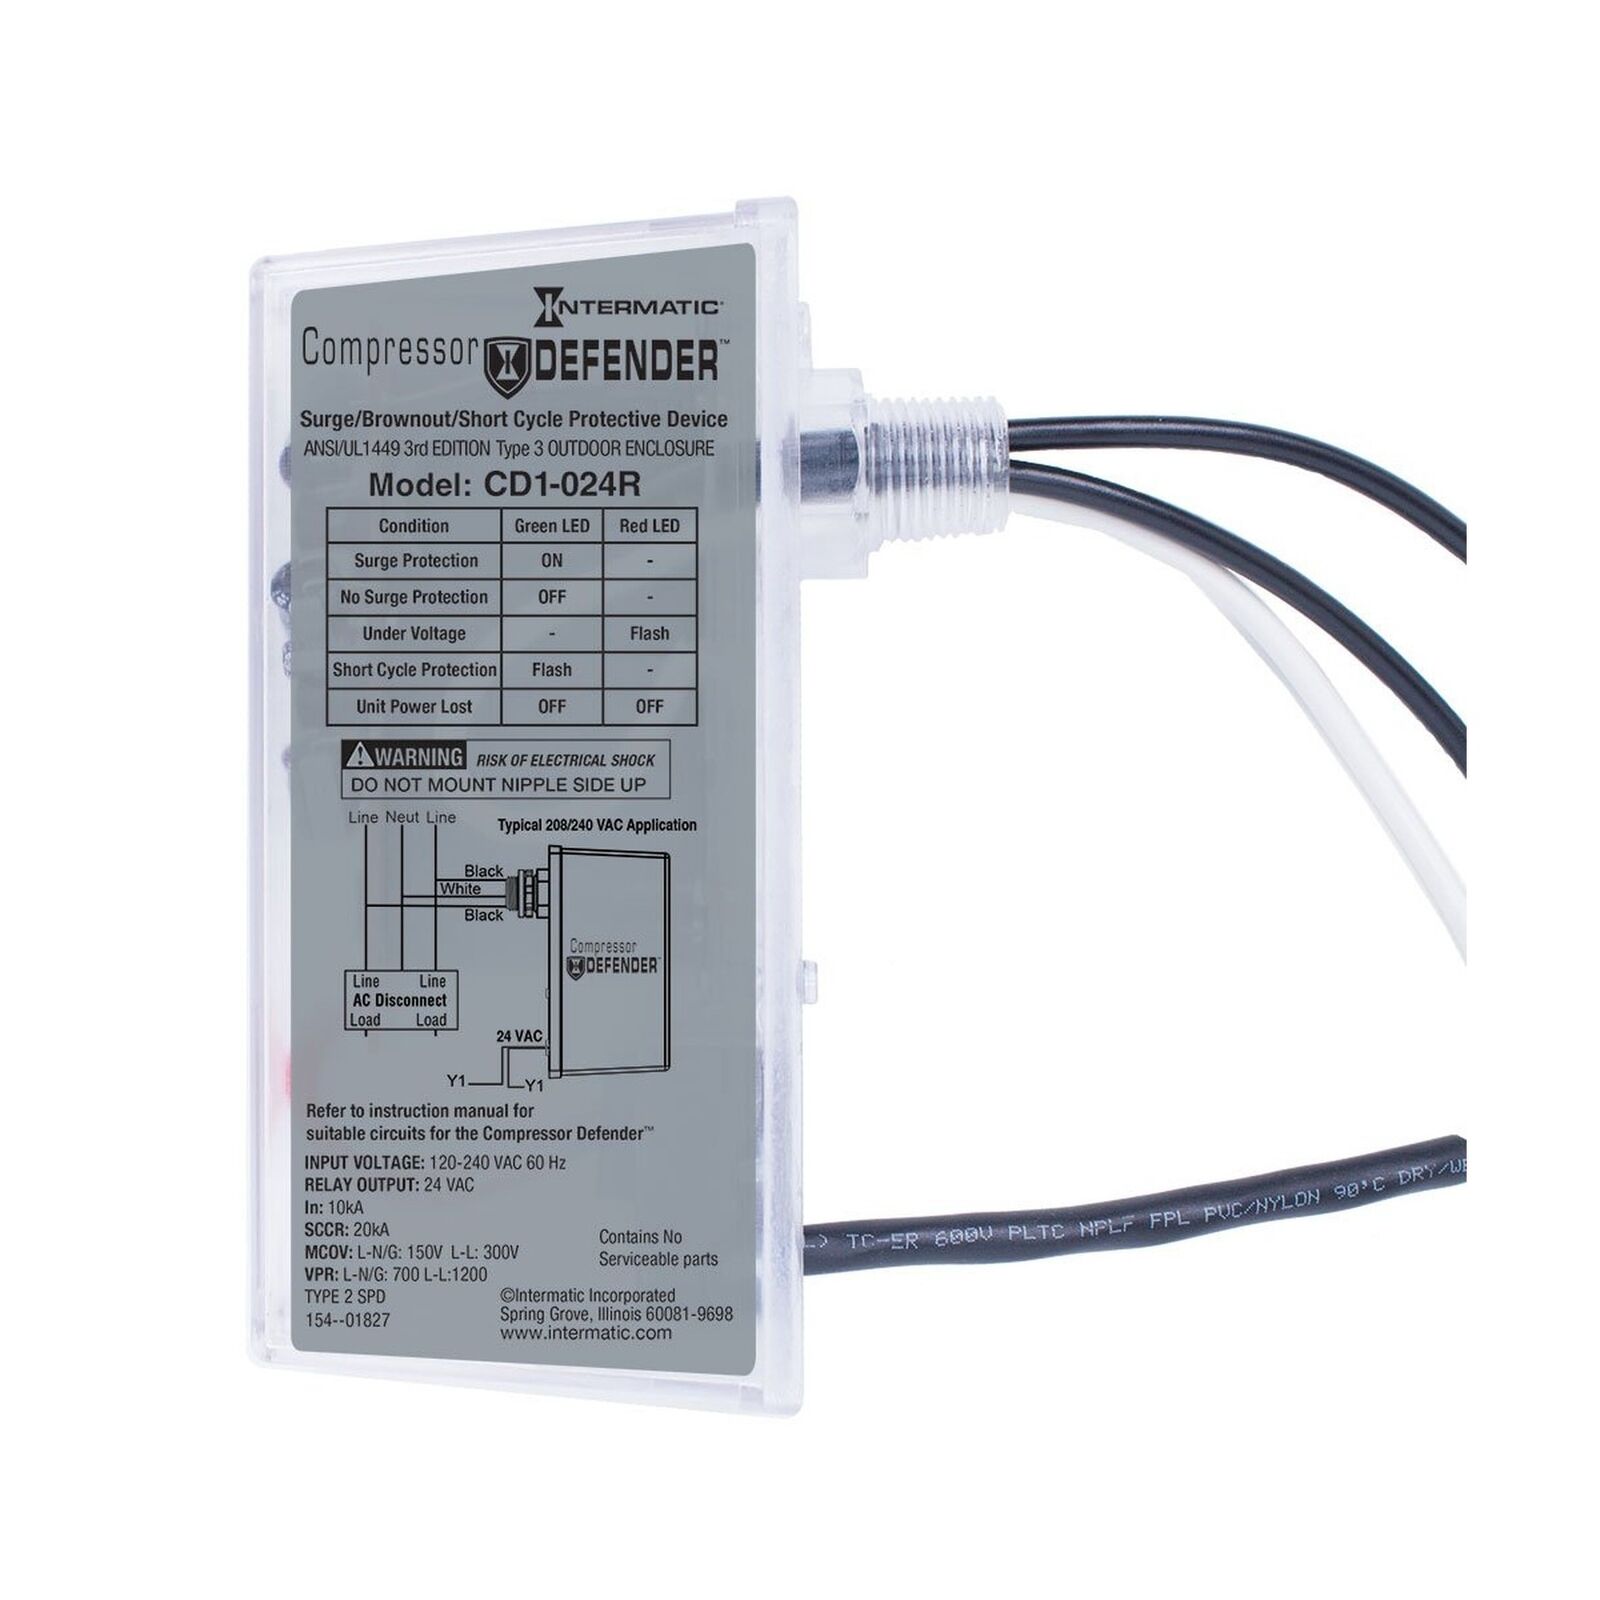 Intermatic CD1-024R Compressor Defender Protects Central Air Conditioner / He...